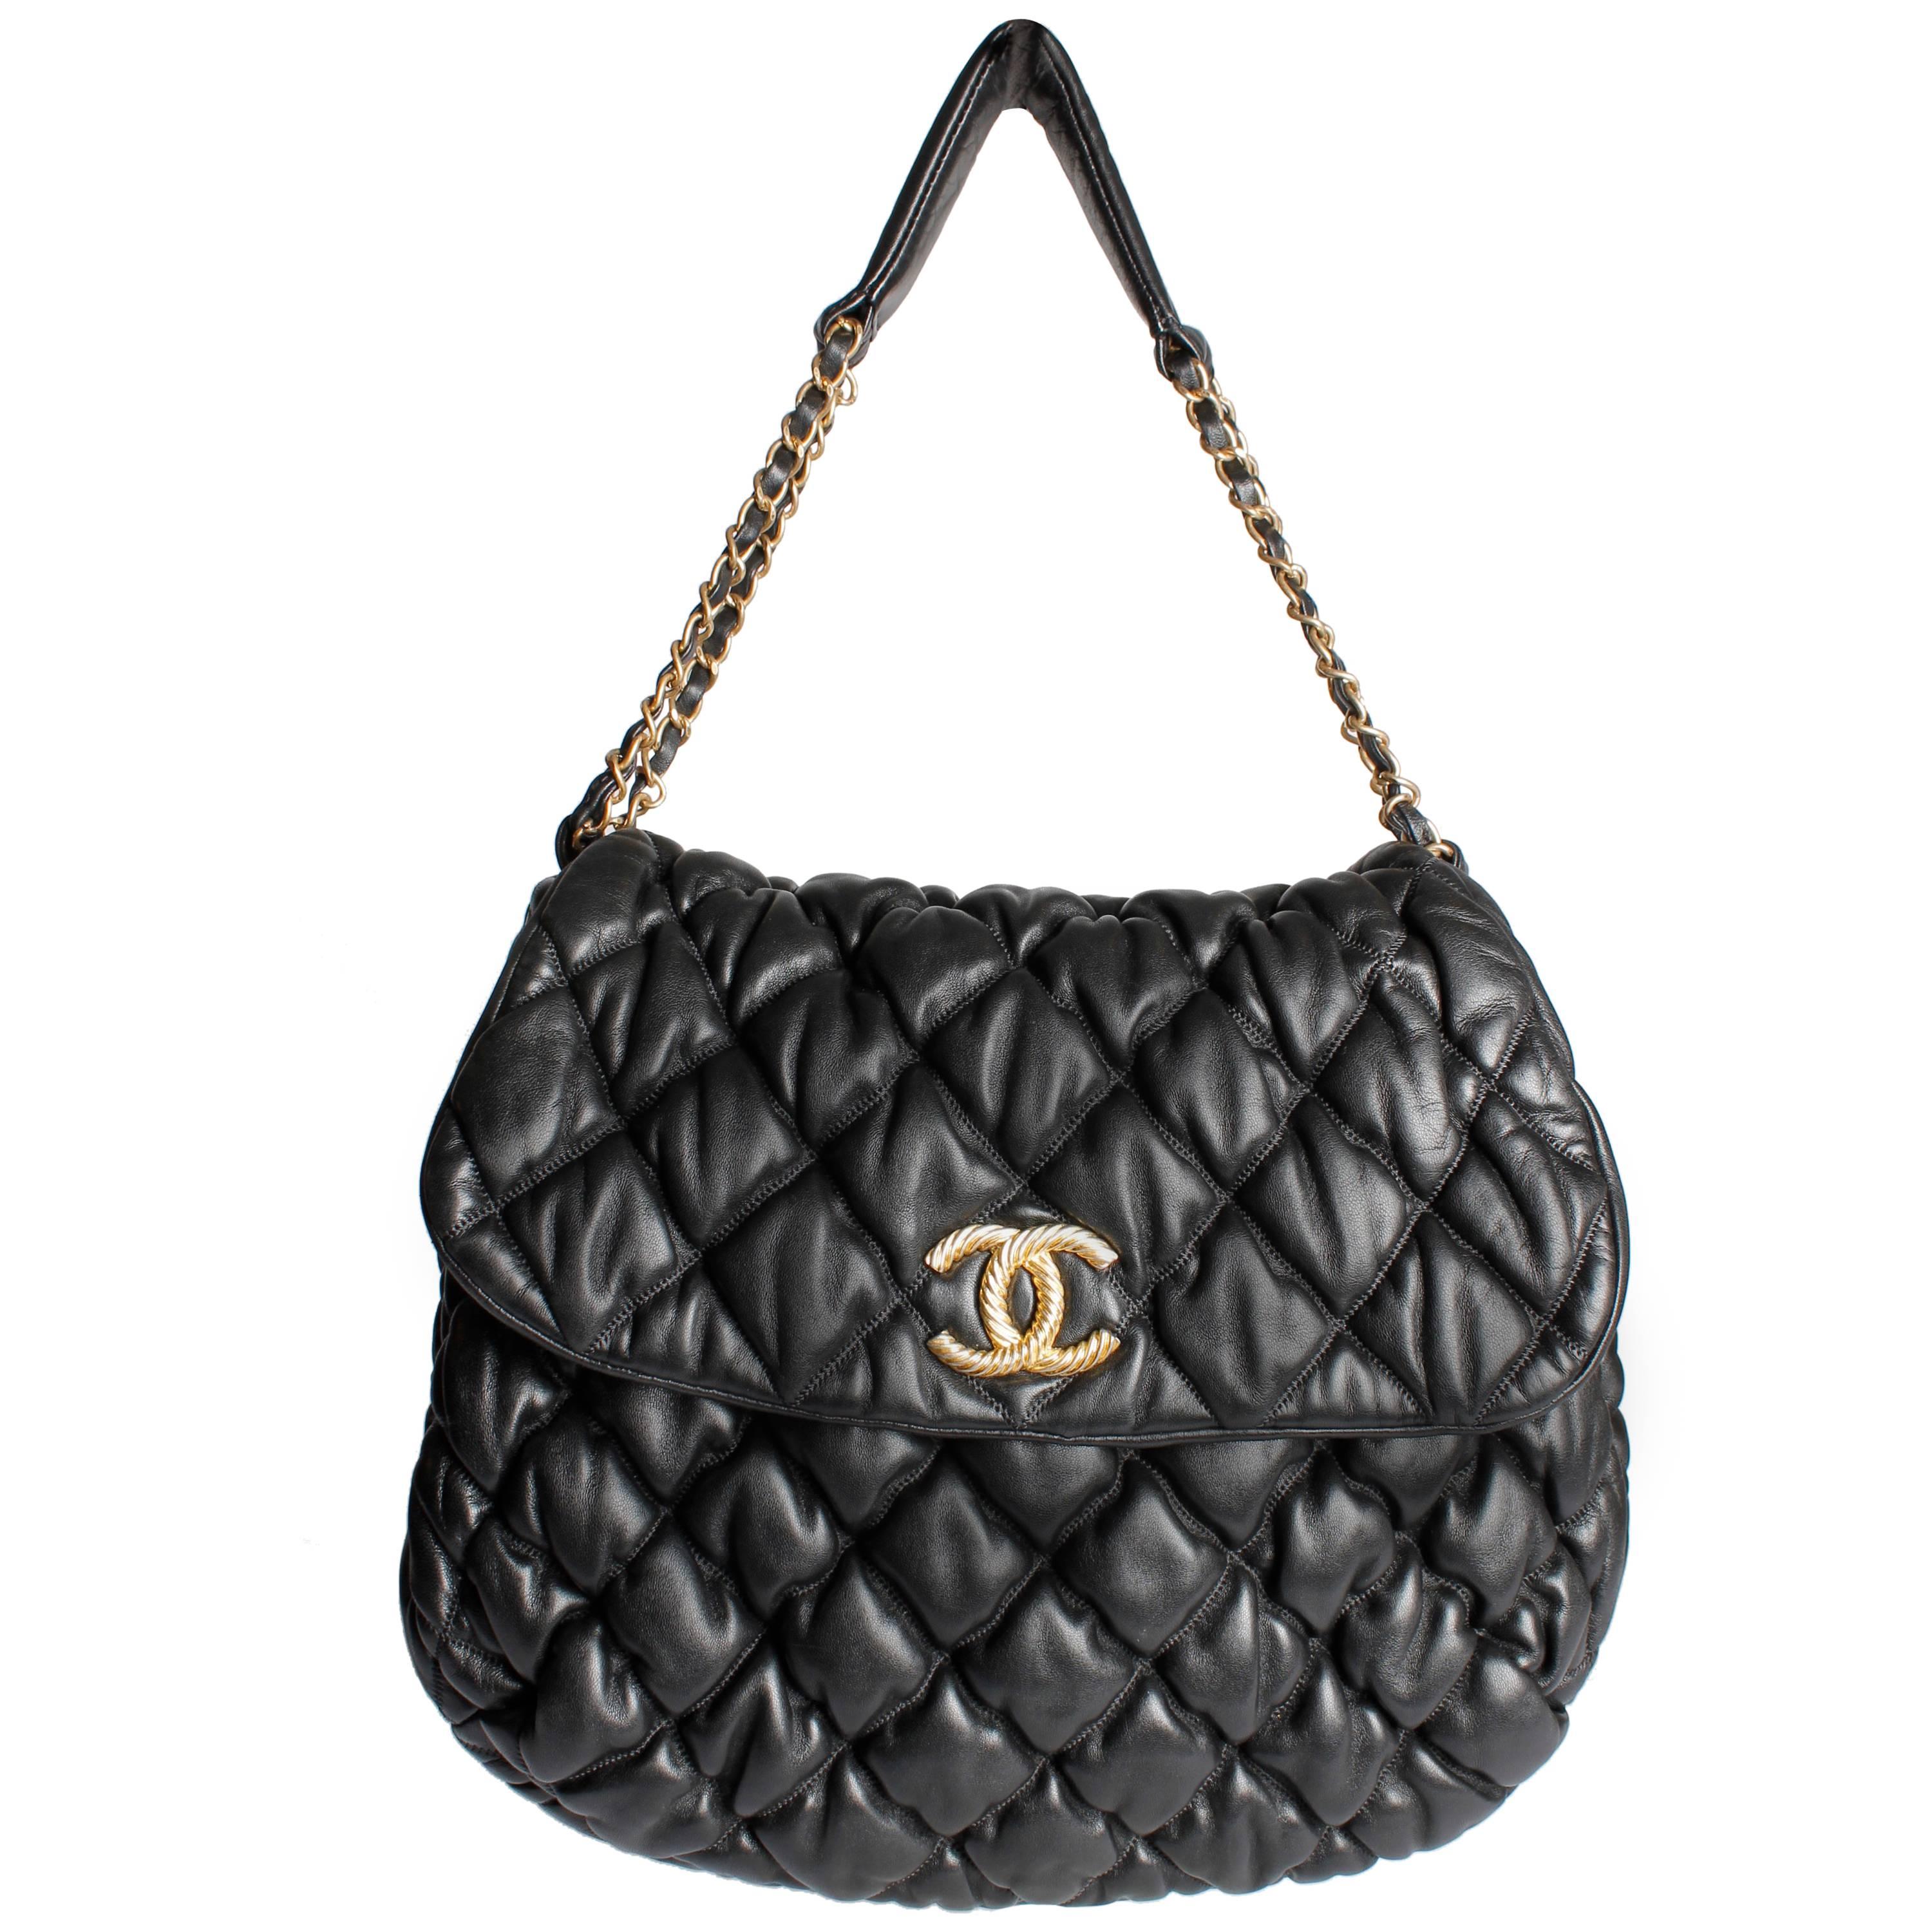 Chanel Bubble Quilted Flap Bag - black leather